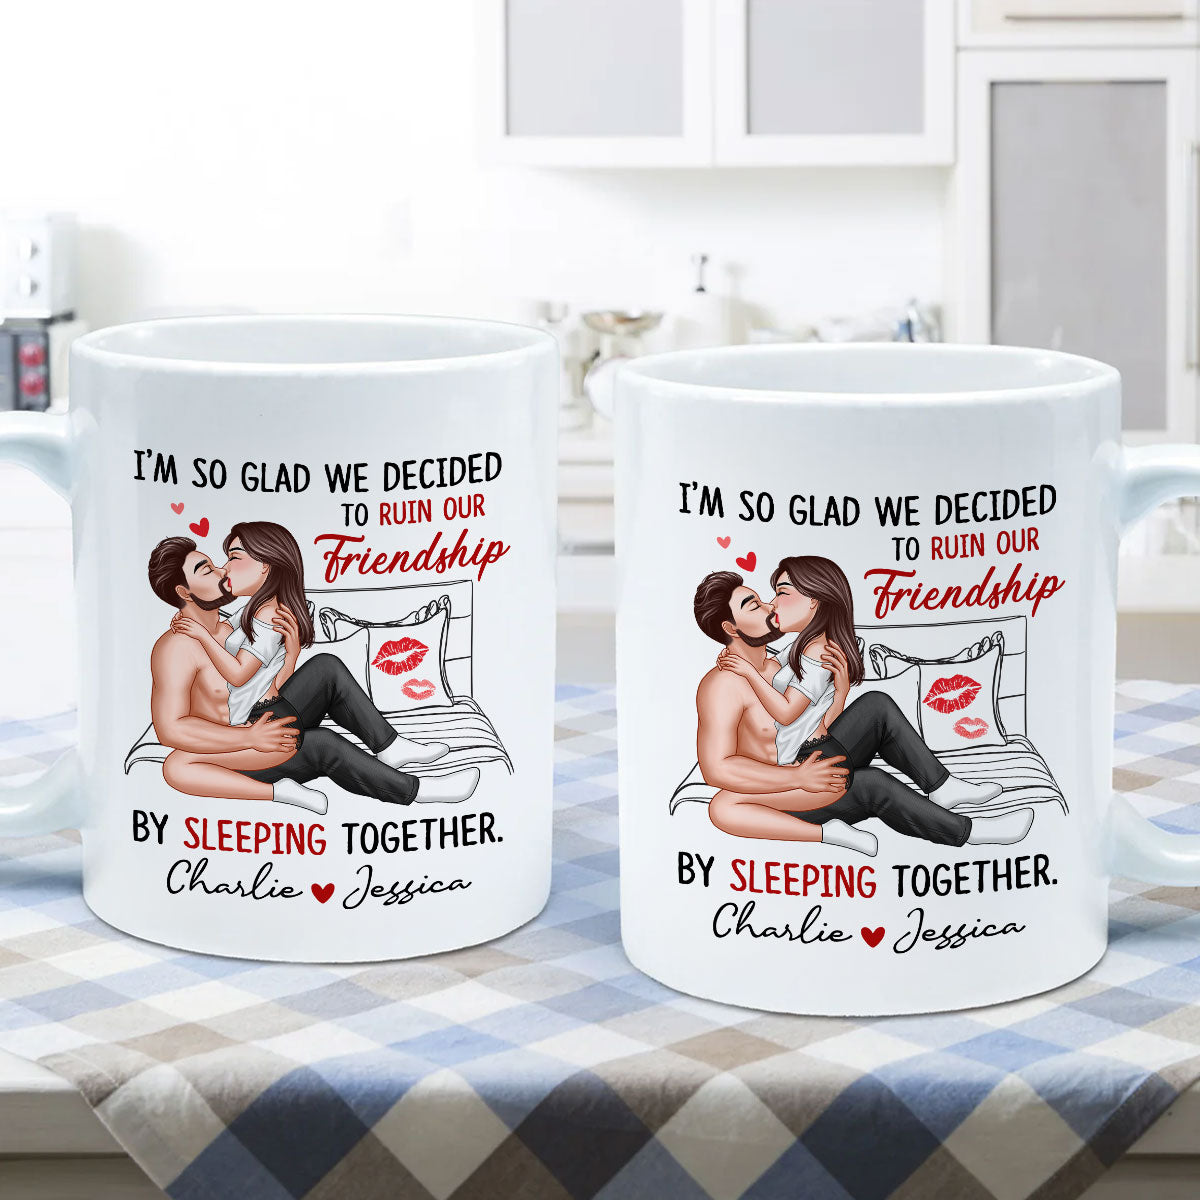 Funny Gift For Couple I‘m So Glad We Ruined Our Friendship Sexy Kissing Couple Personalized Mug